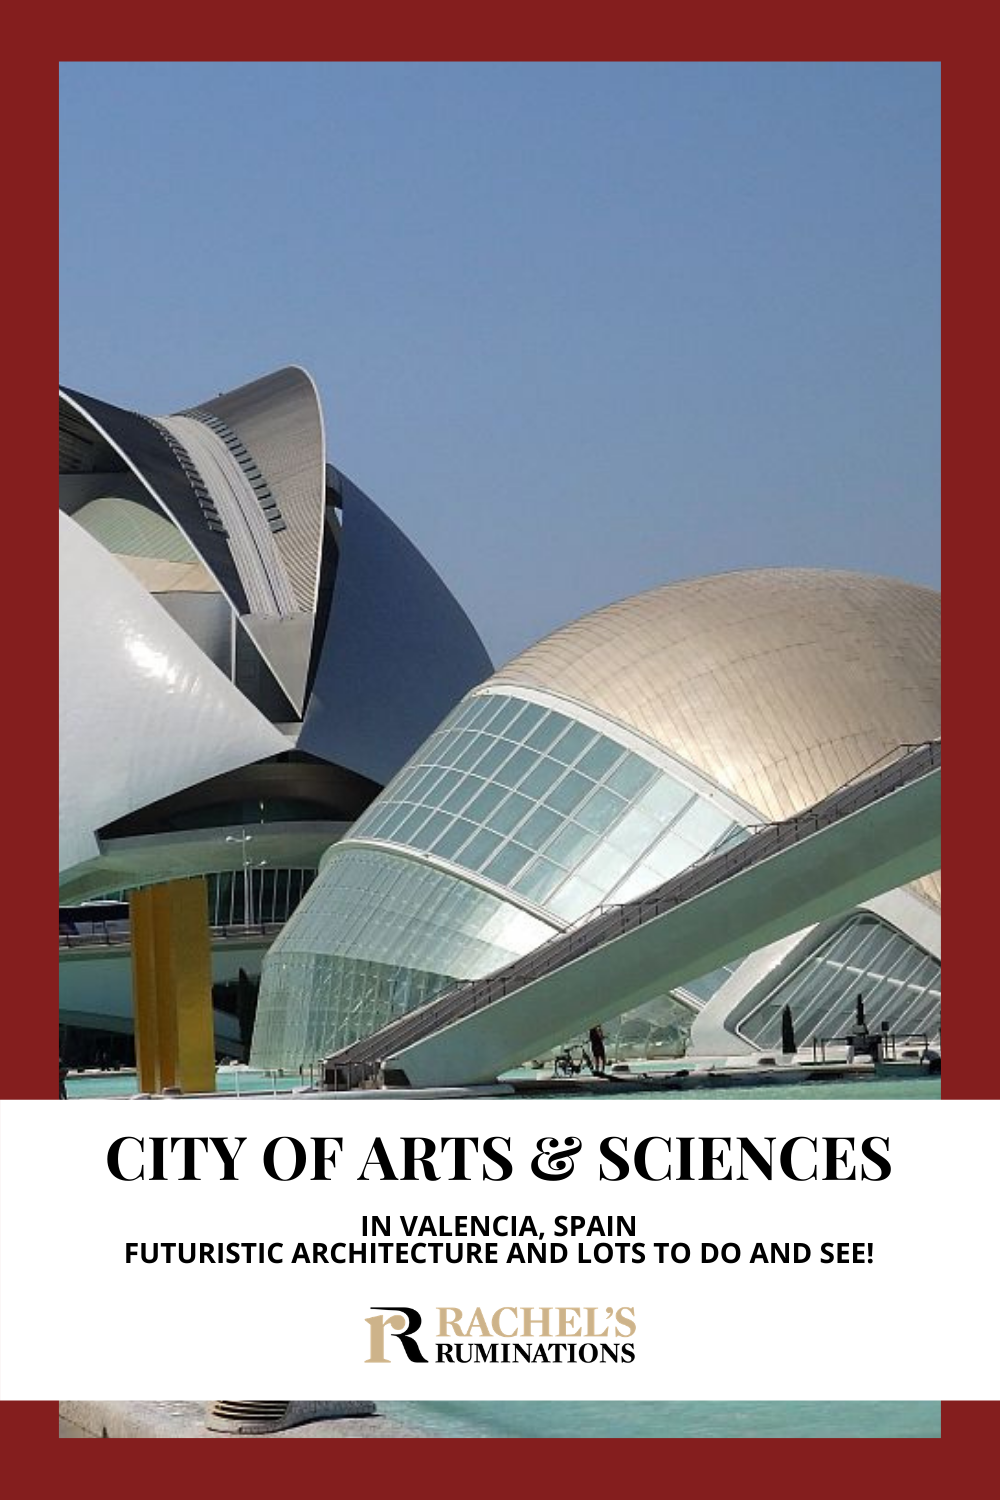 The City of Arts and Sciences in Valencia, Spain, is a place of futuristic architecture with a science museum, an aquarium, and much more. via @rachelsruminations